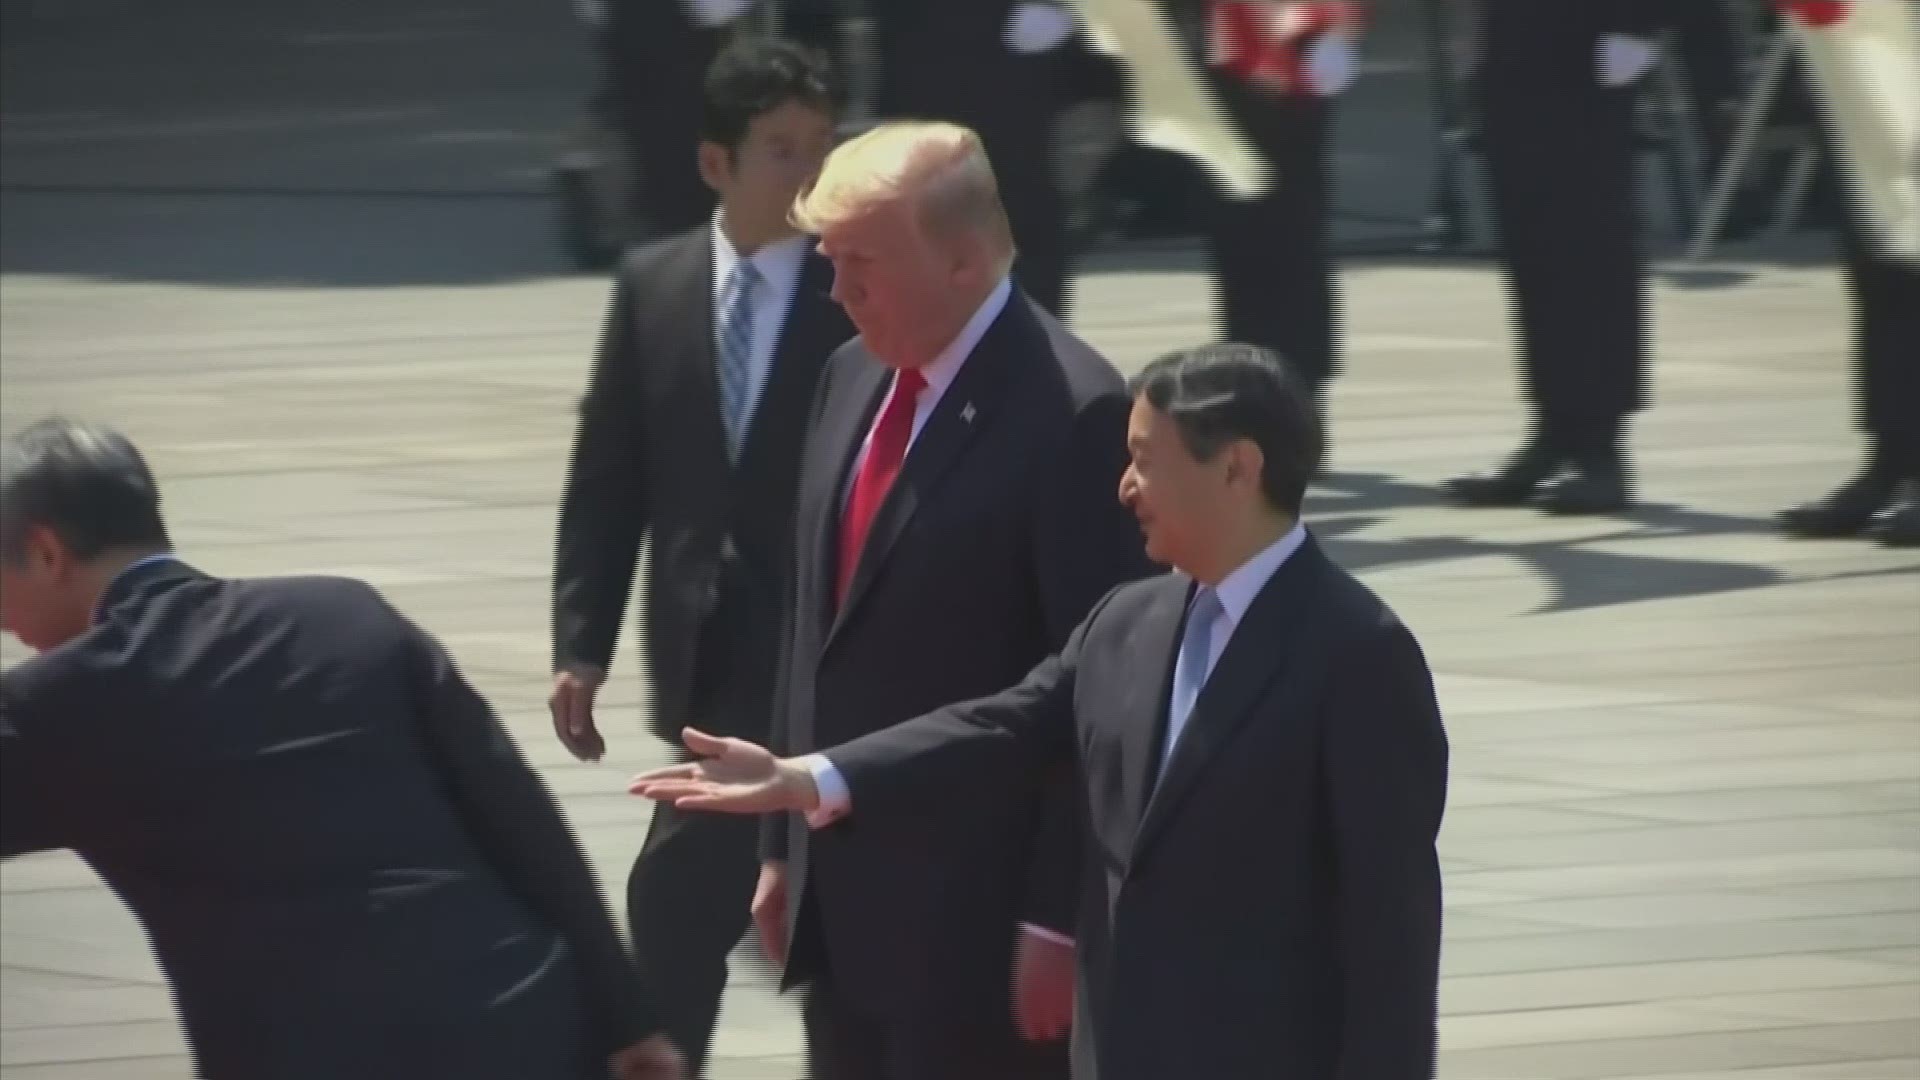 President Donald Trump made history on Monday under a blazing, hot sun at Japan's Imperial Palace, becoming the first world leader to meet the new emperor of Japan. (AP)